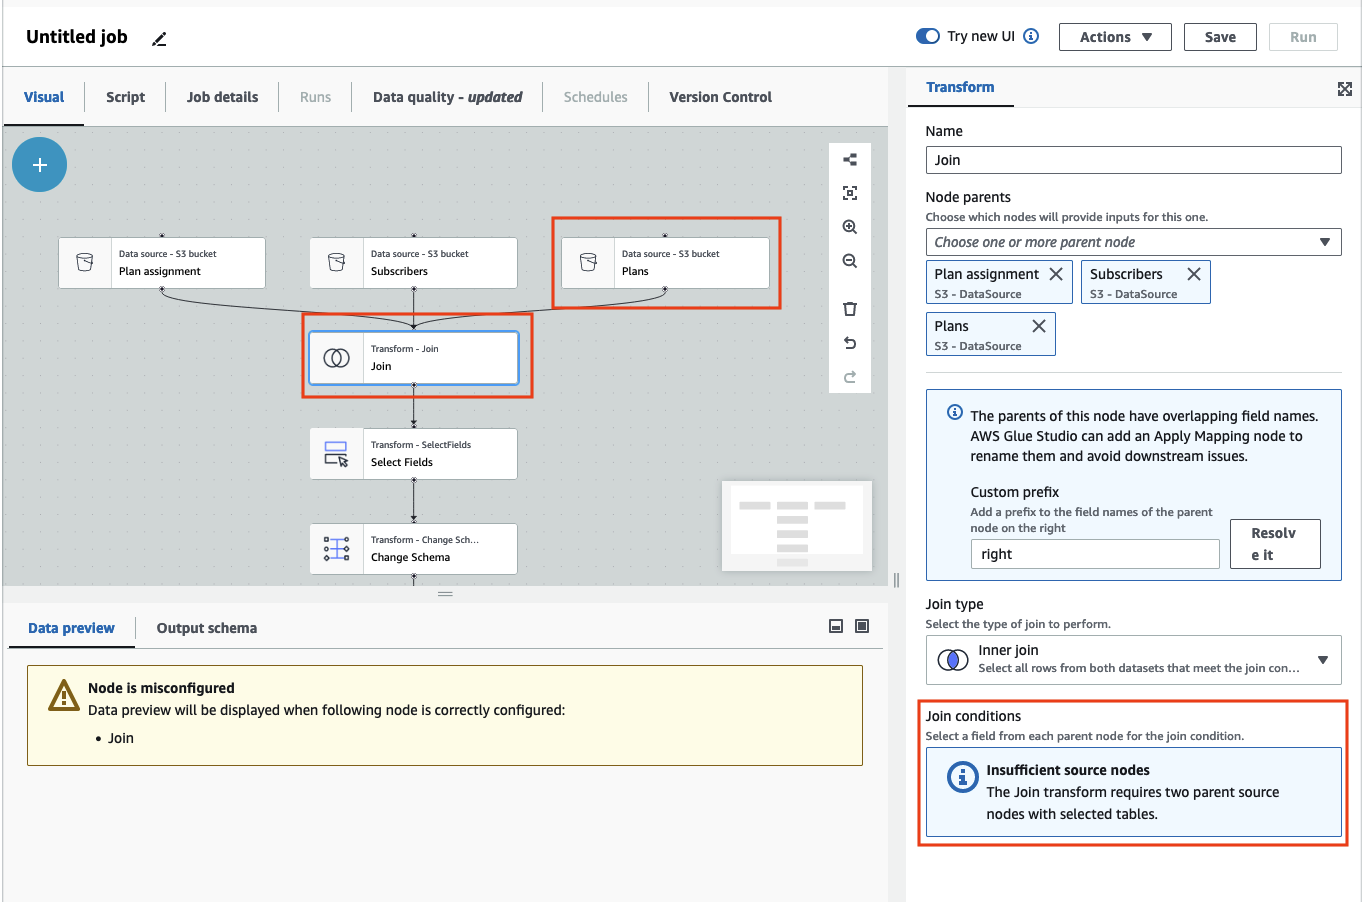 
            The screenshot shows a job diagram where parent nodes are two source nodes - Plan assignment and 
              Subscribers. They are connected to a Join node. A Plans source node and Join node are connected to the Change 
              Schema node. The Catalog node is connected to the Change schema node.
          